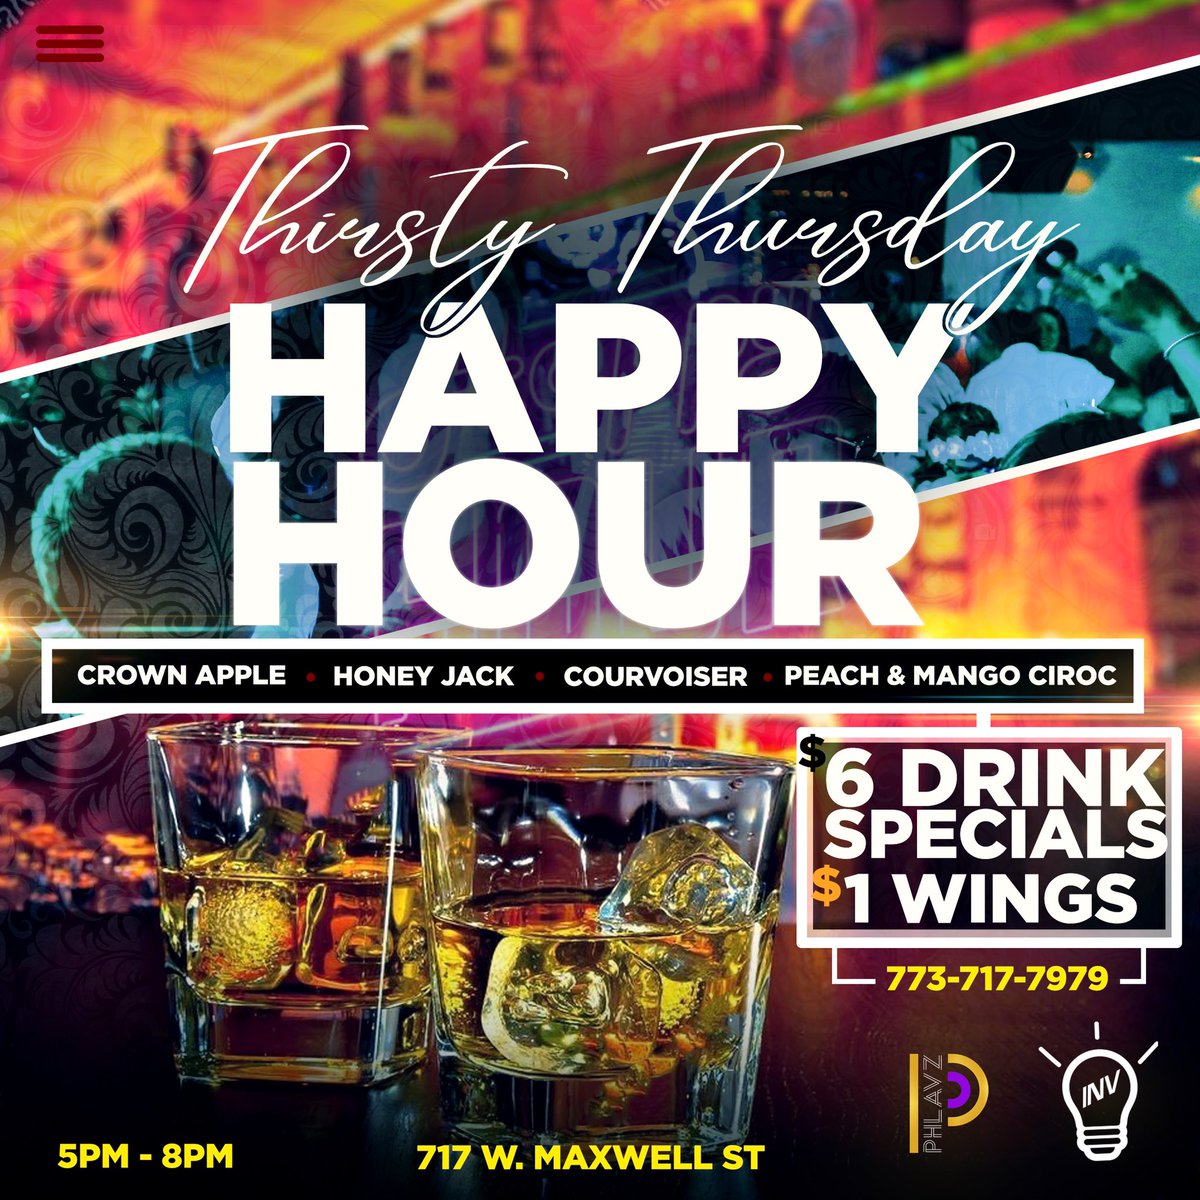 Every other Thursday we live at Phlavz for Happy Hour 5-8pm!! Enjoy $1 jerk wings and $6 cocktail specials!! Pull up TOMORROW and start your Thirsty Thursday off right 🔥 
#TheINVpresents #HappyHourChicago